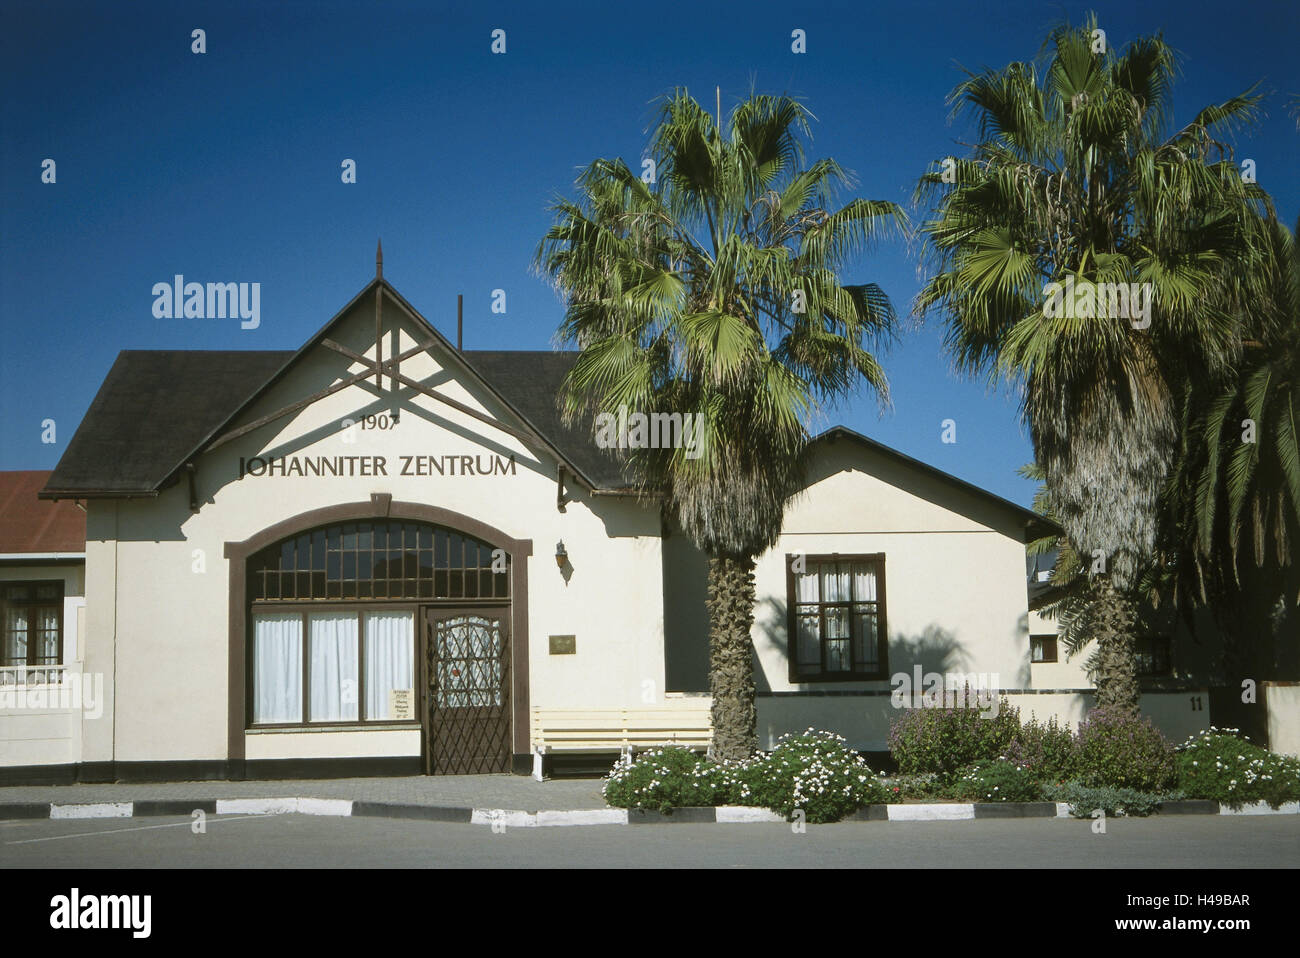 Namibia, Swakopmund, house, Maltese Knight's centre, Africa, South-West, Africa, building, historically, architecture, colonial age, colonial architecture, in German, in 1907, Maltese Knight's orders, Maltese Knight's centre, Maltese Knight, auxiliary station, charitable organisation, palms, Stock Photo